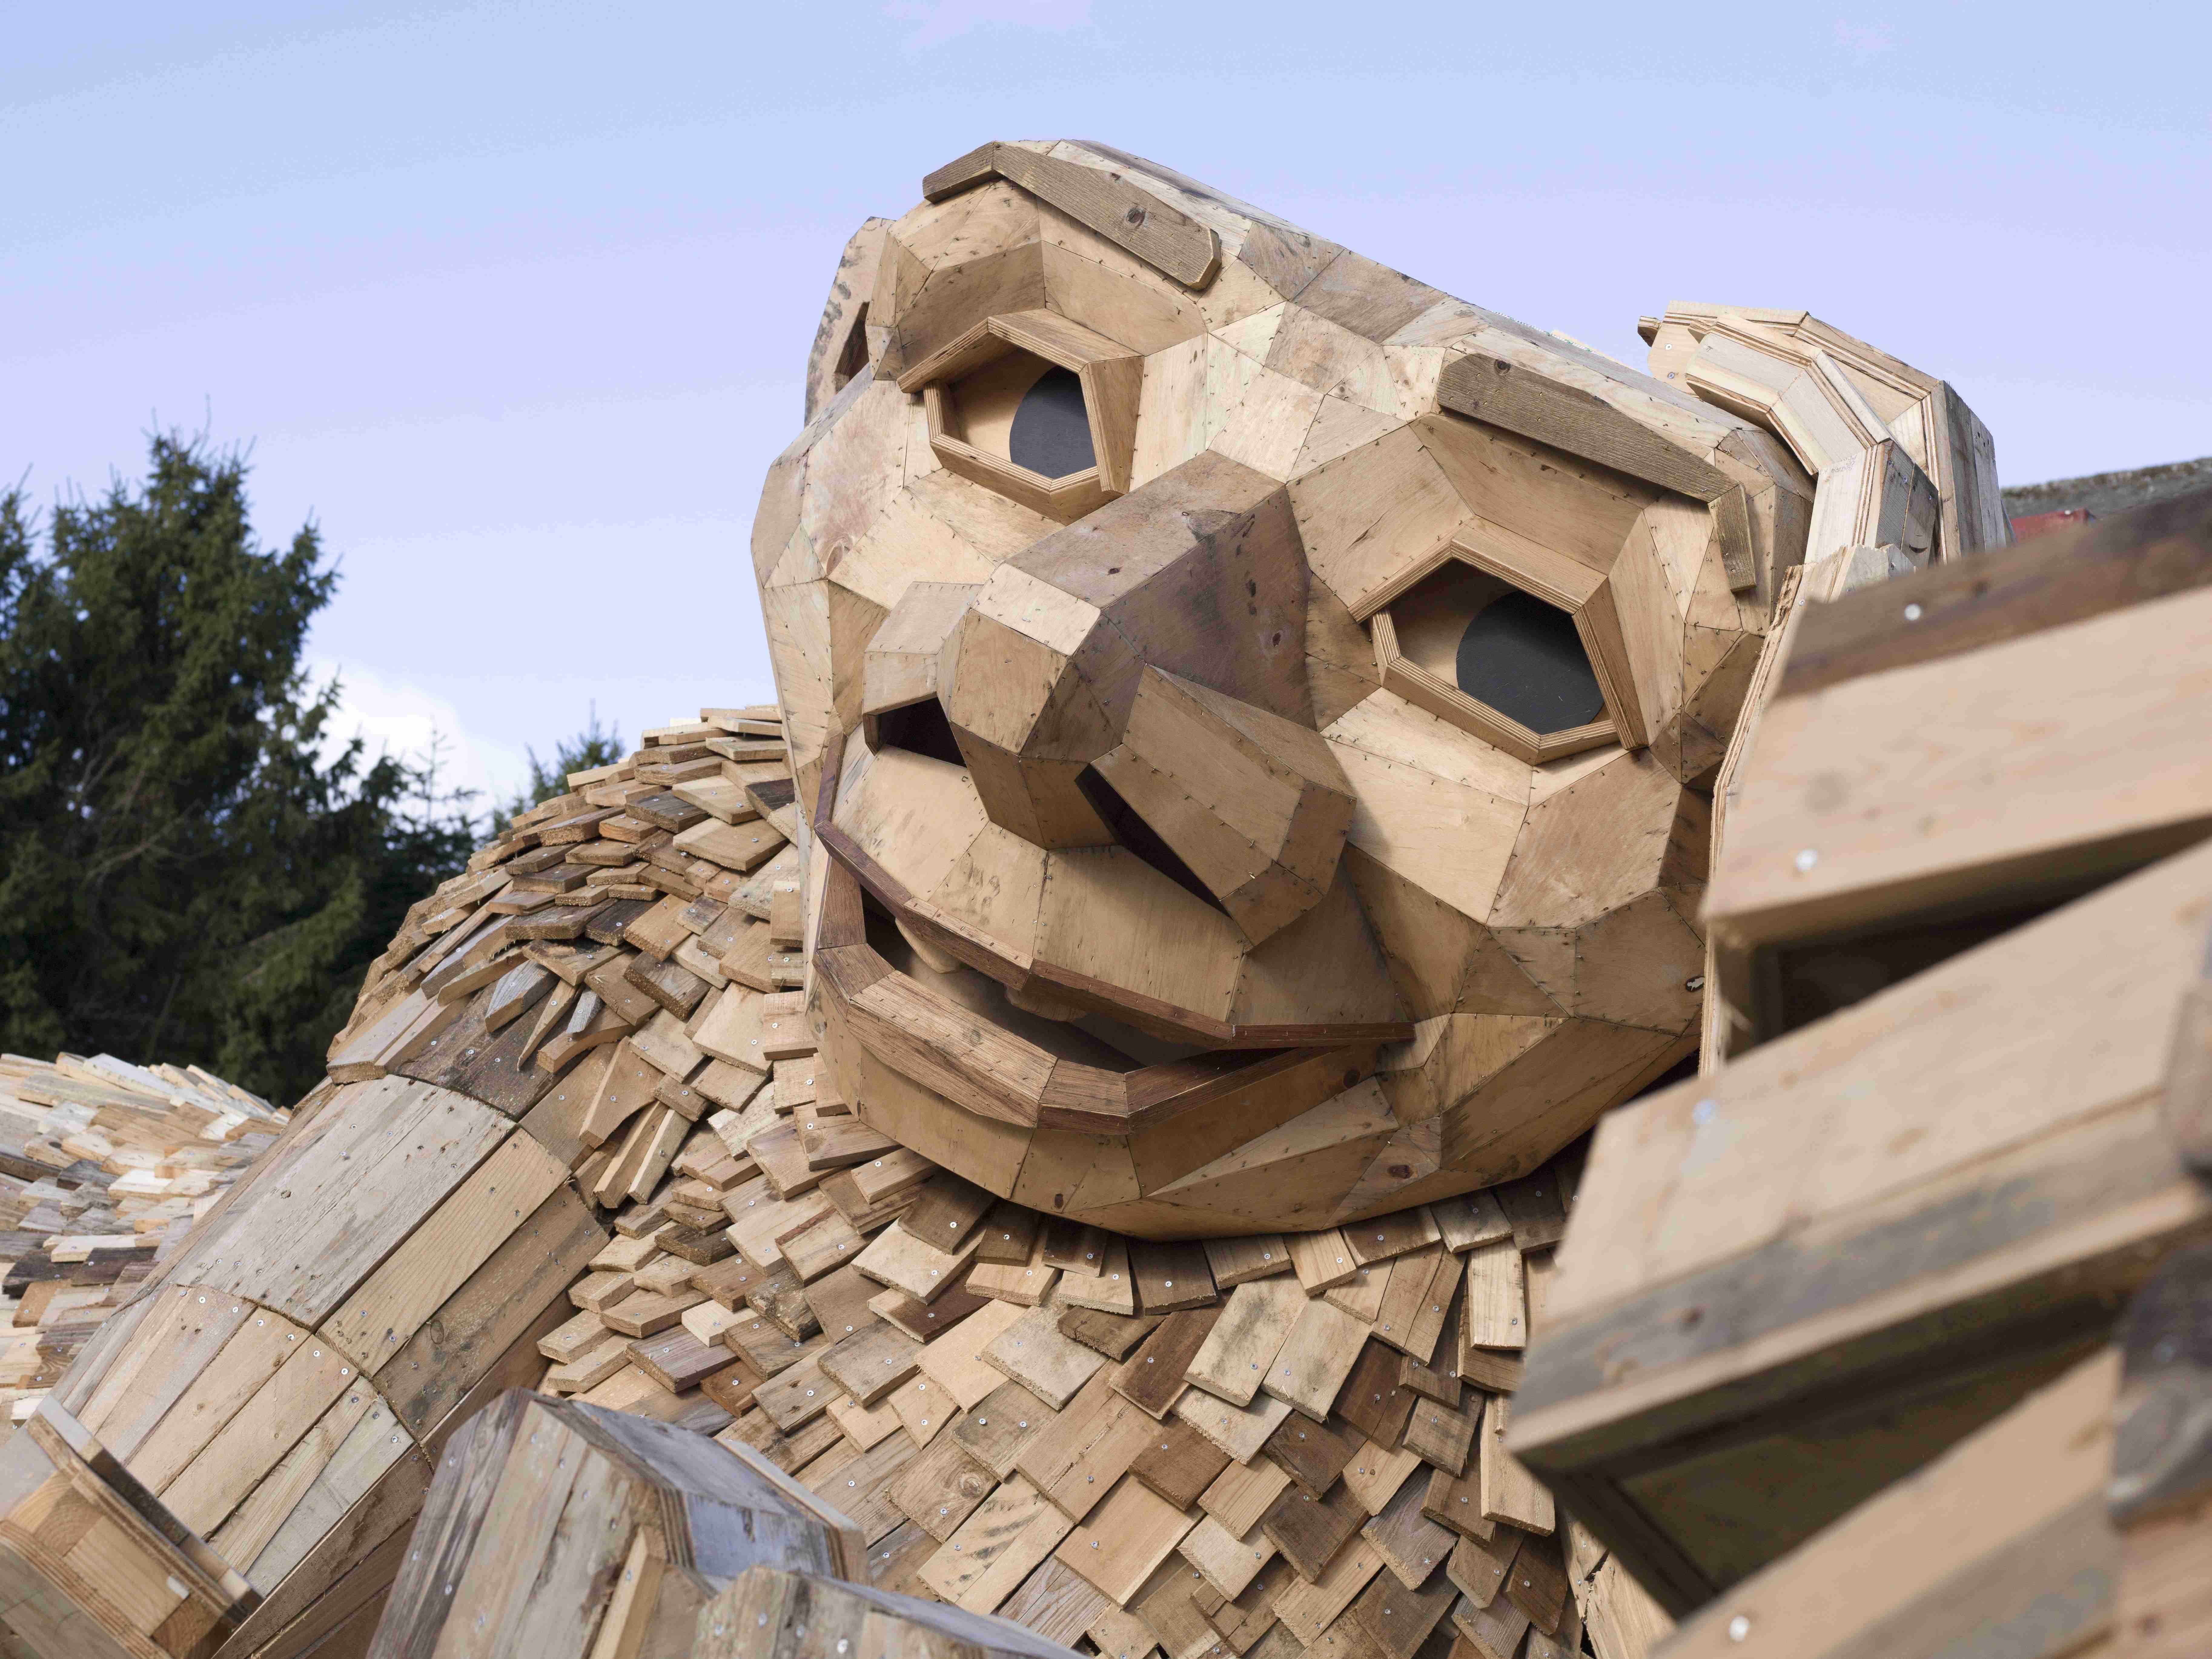 Giant, wooden, smiling troll